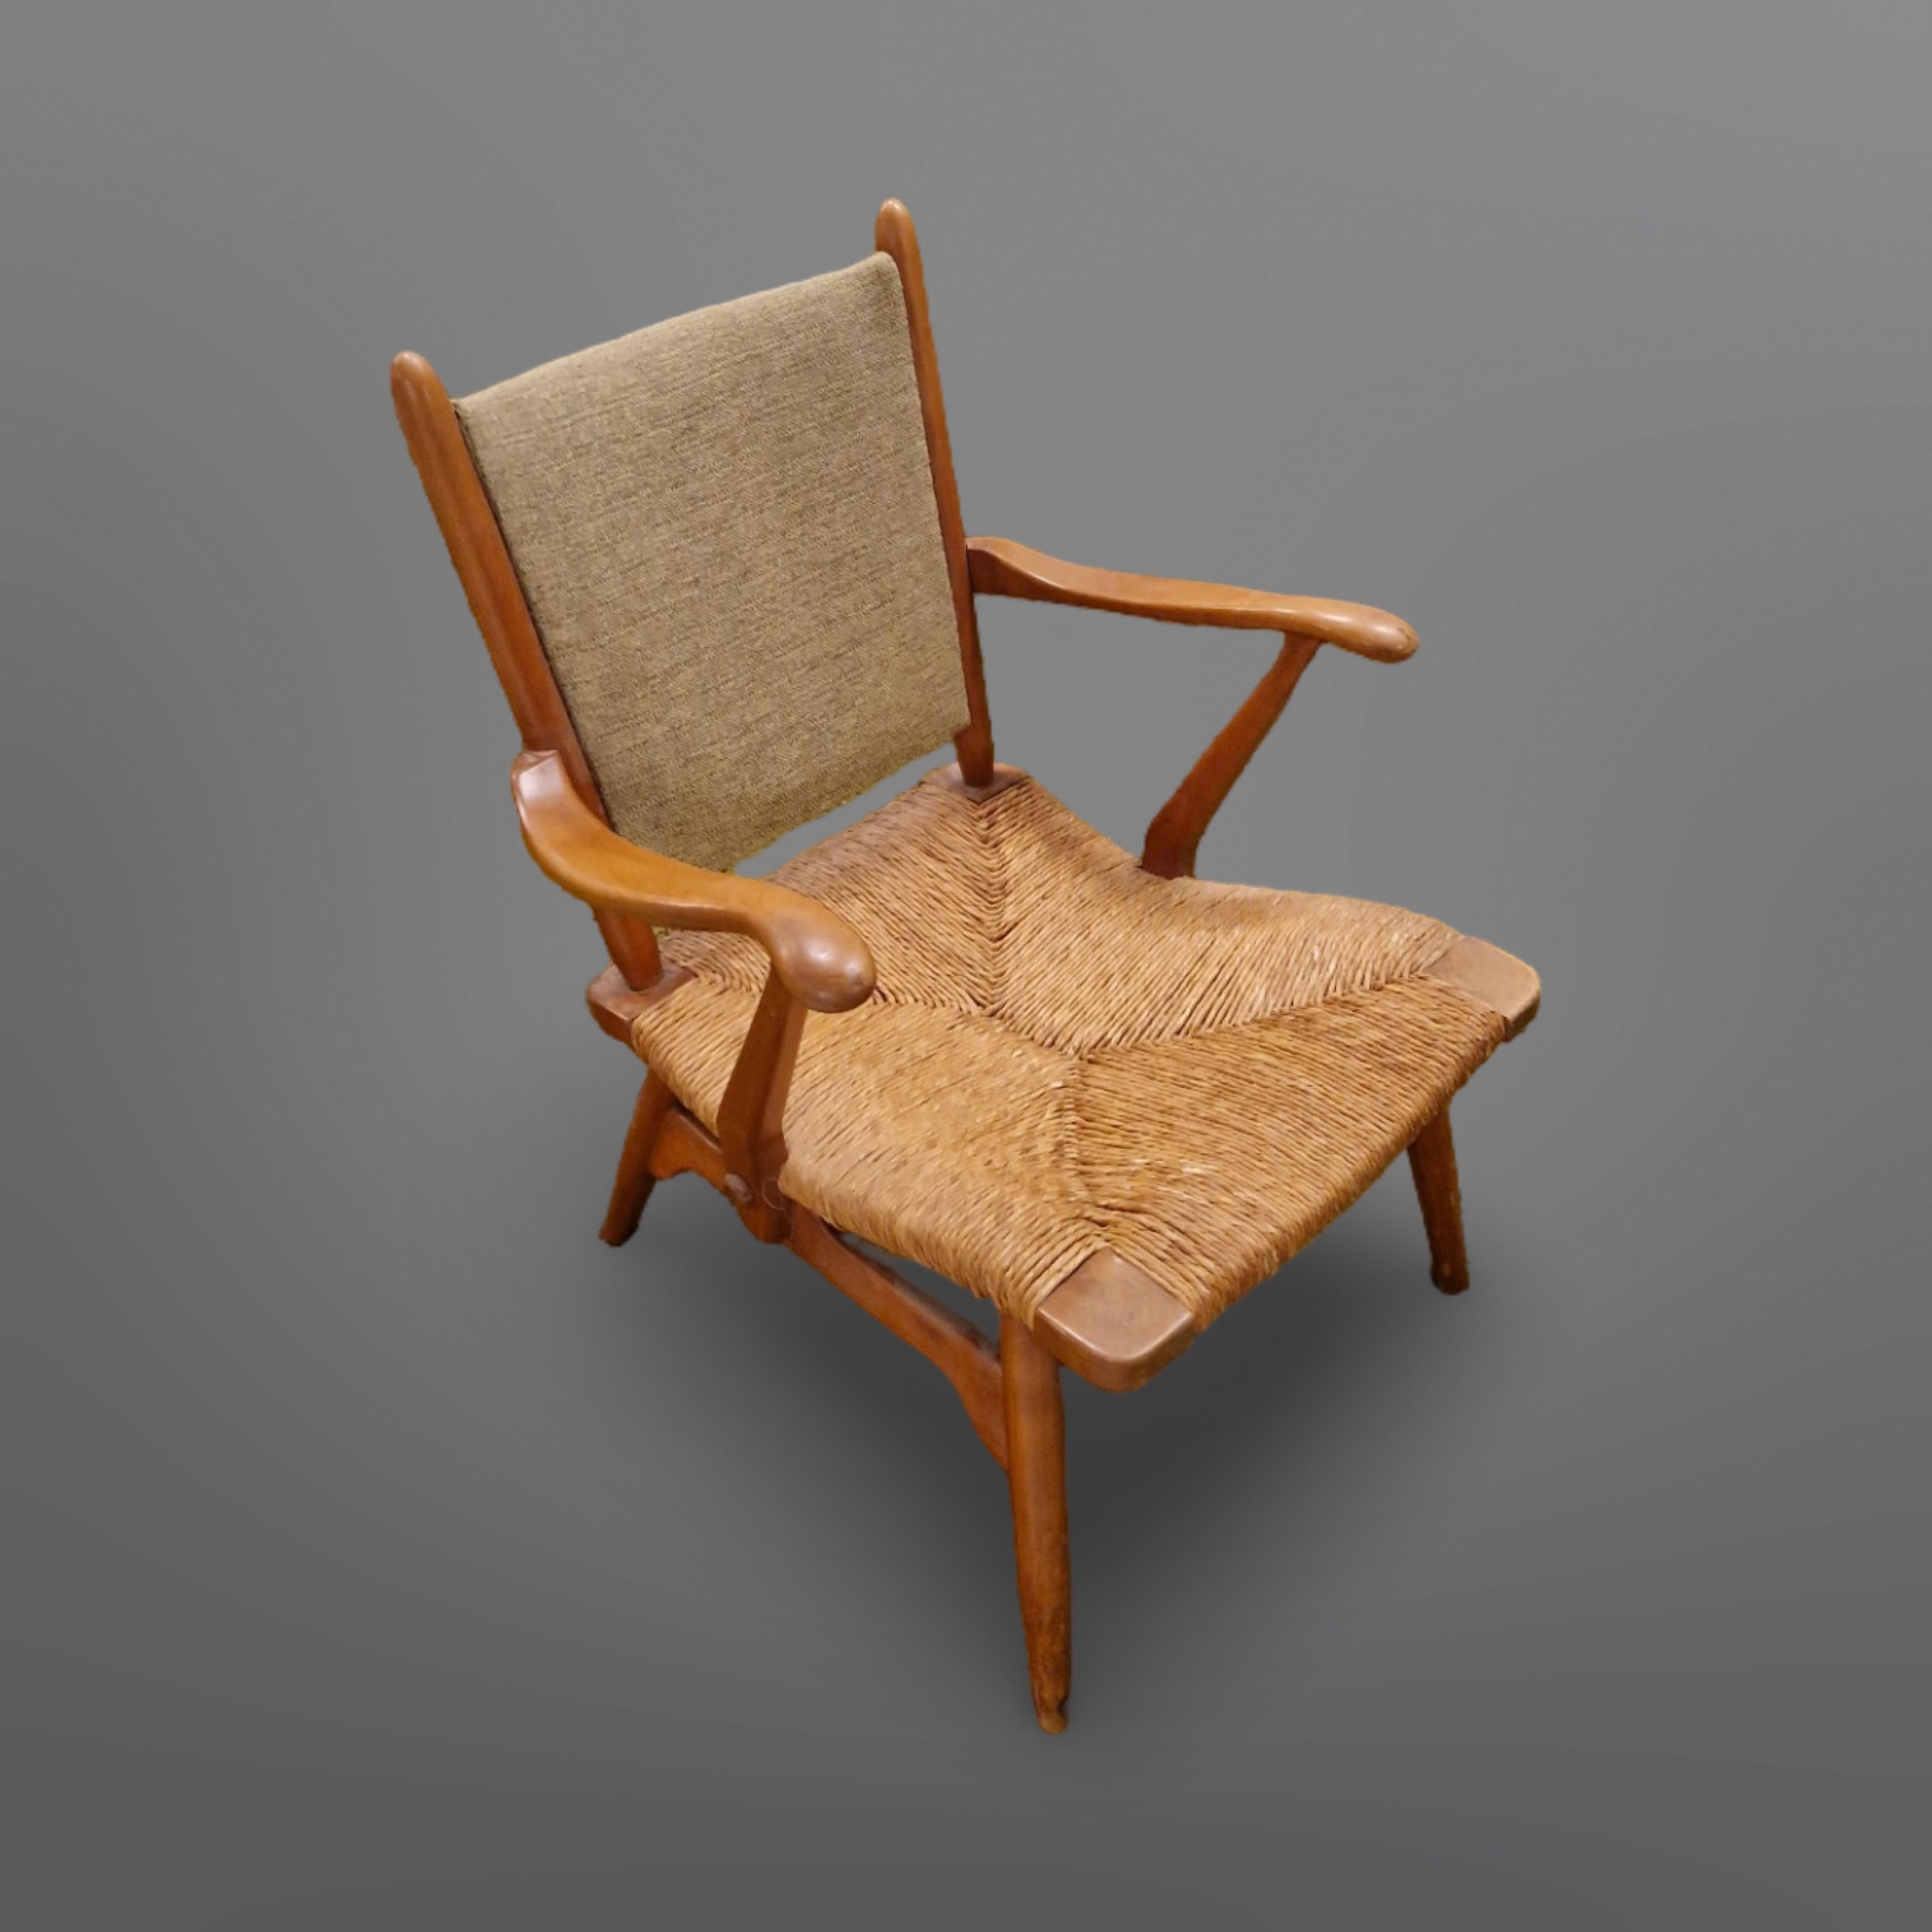 Hand-Woven Mid century wood and rush lounge chair by de Ster Gelderland, Netherlands 1950s